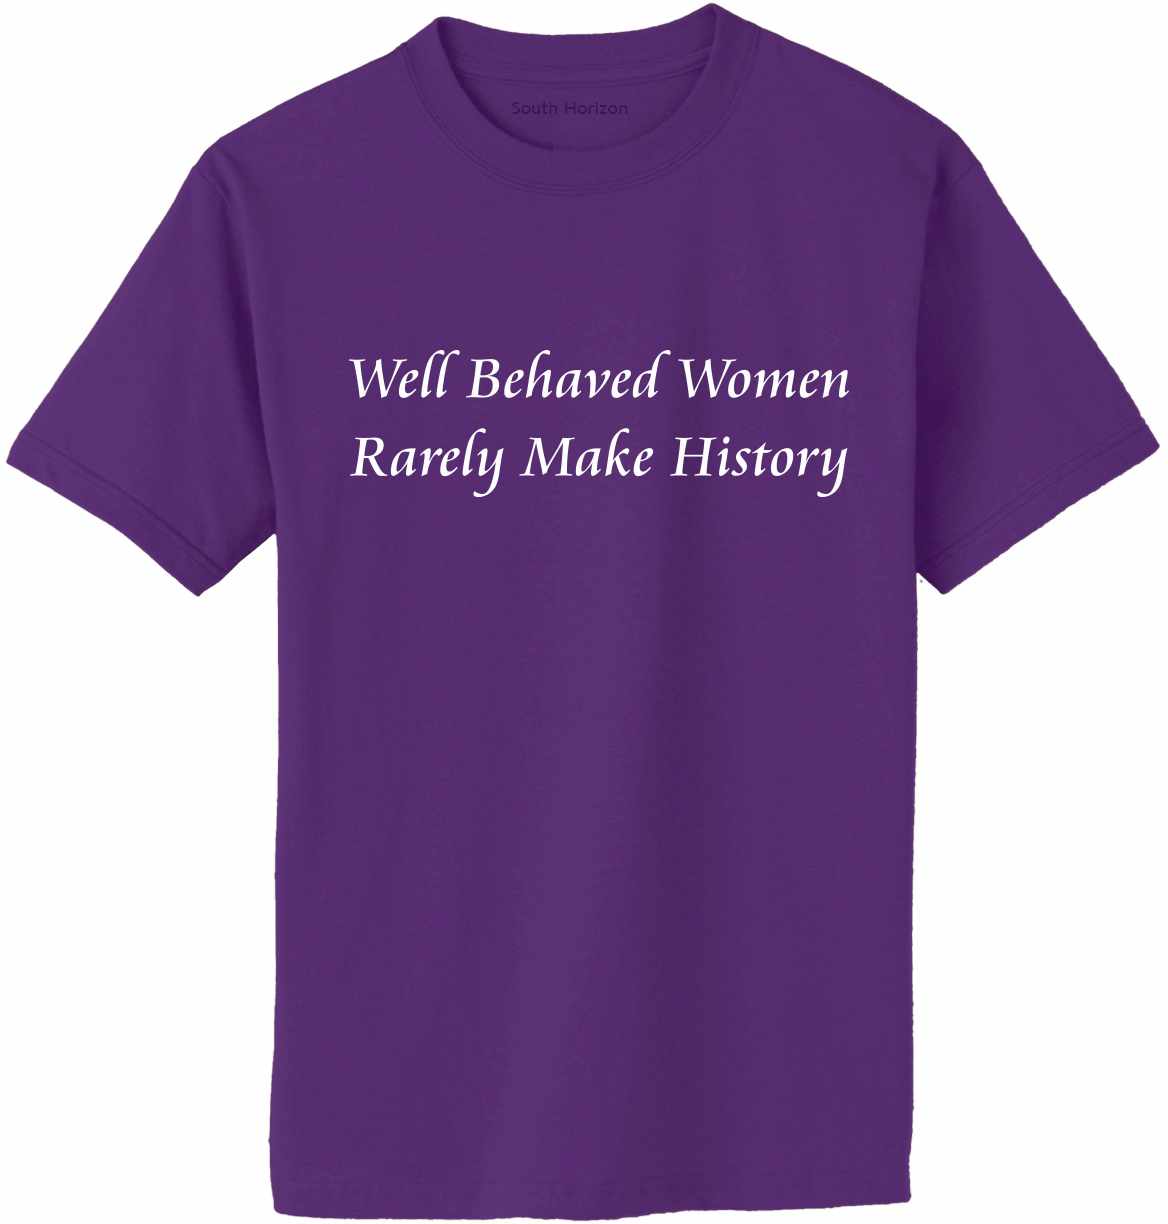 Well Behaved Women Rarely Make History Adult T-Shirt (#488-1)